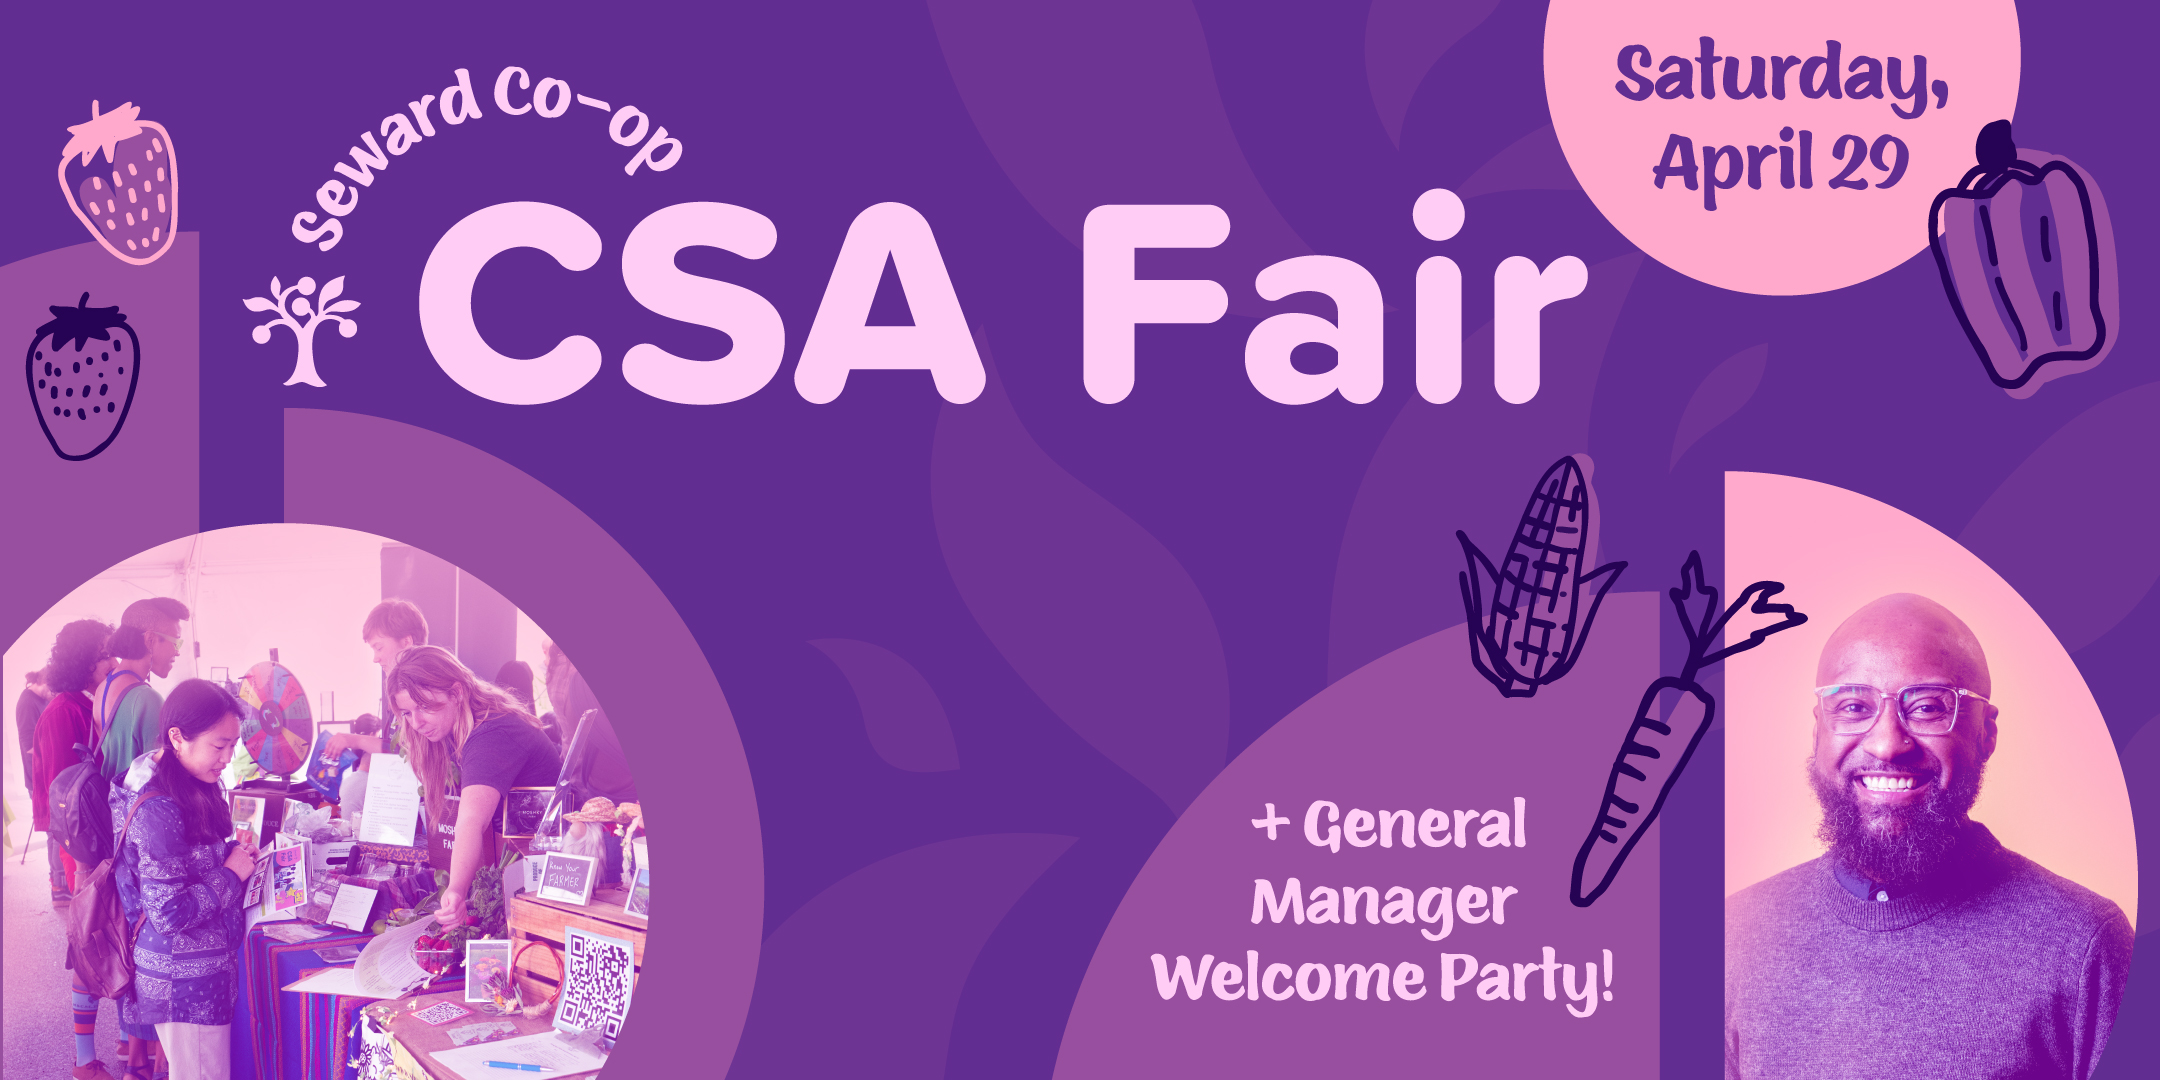 A graphic promoting the CSA Fair in 2023